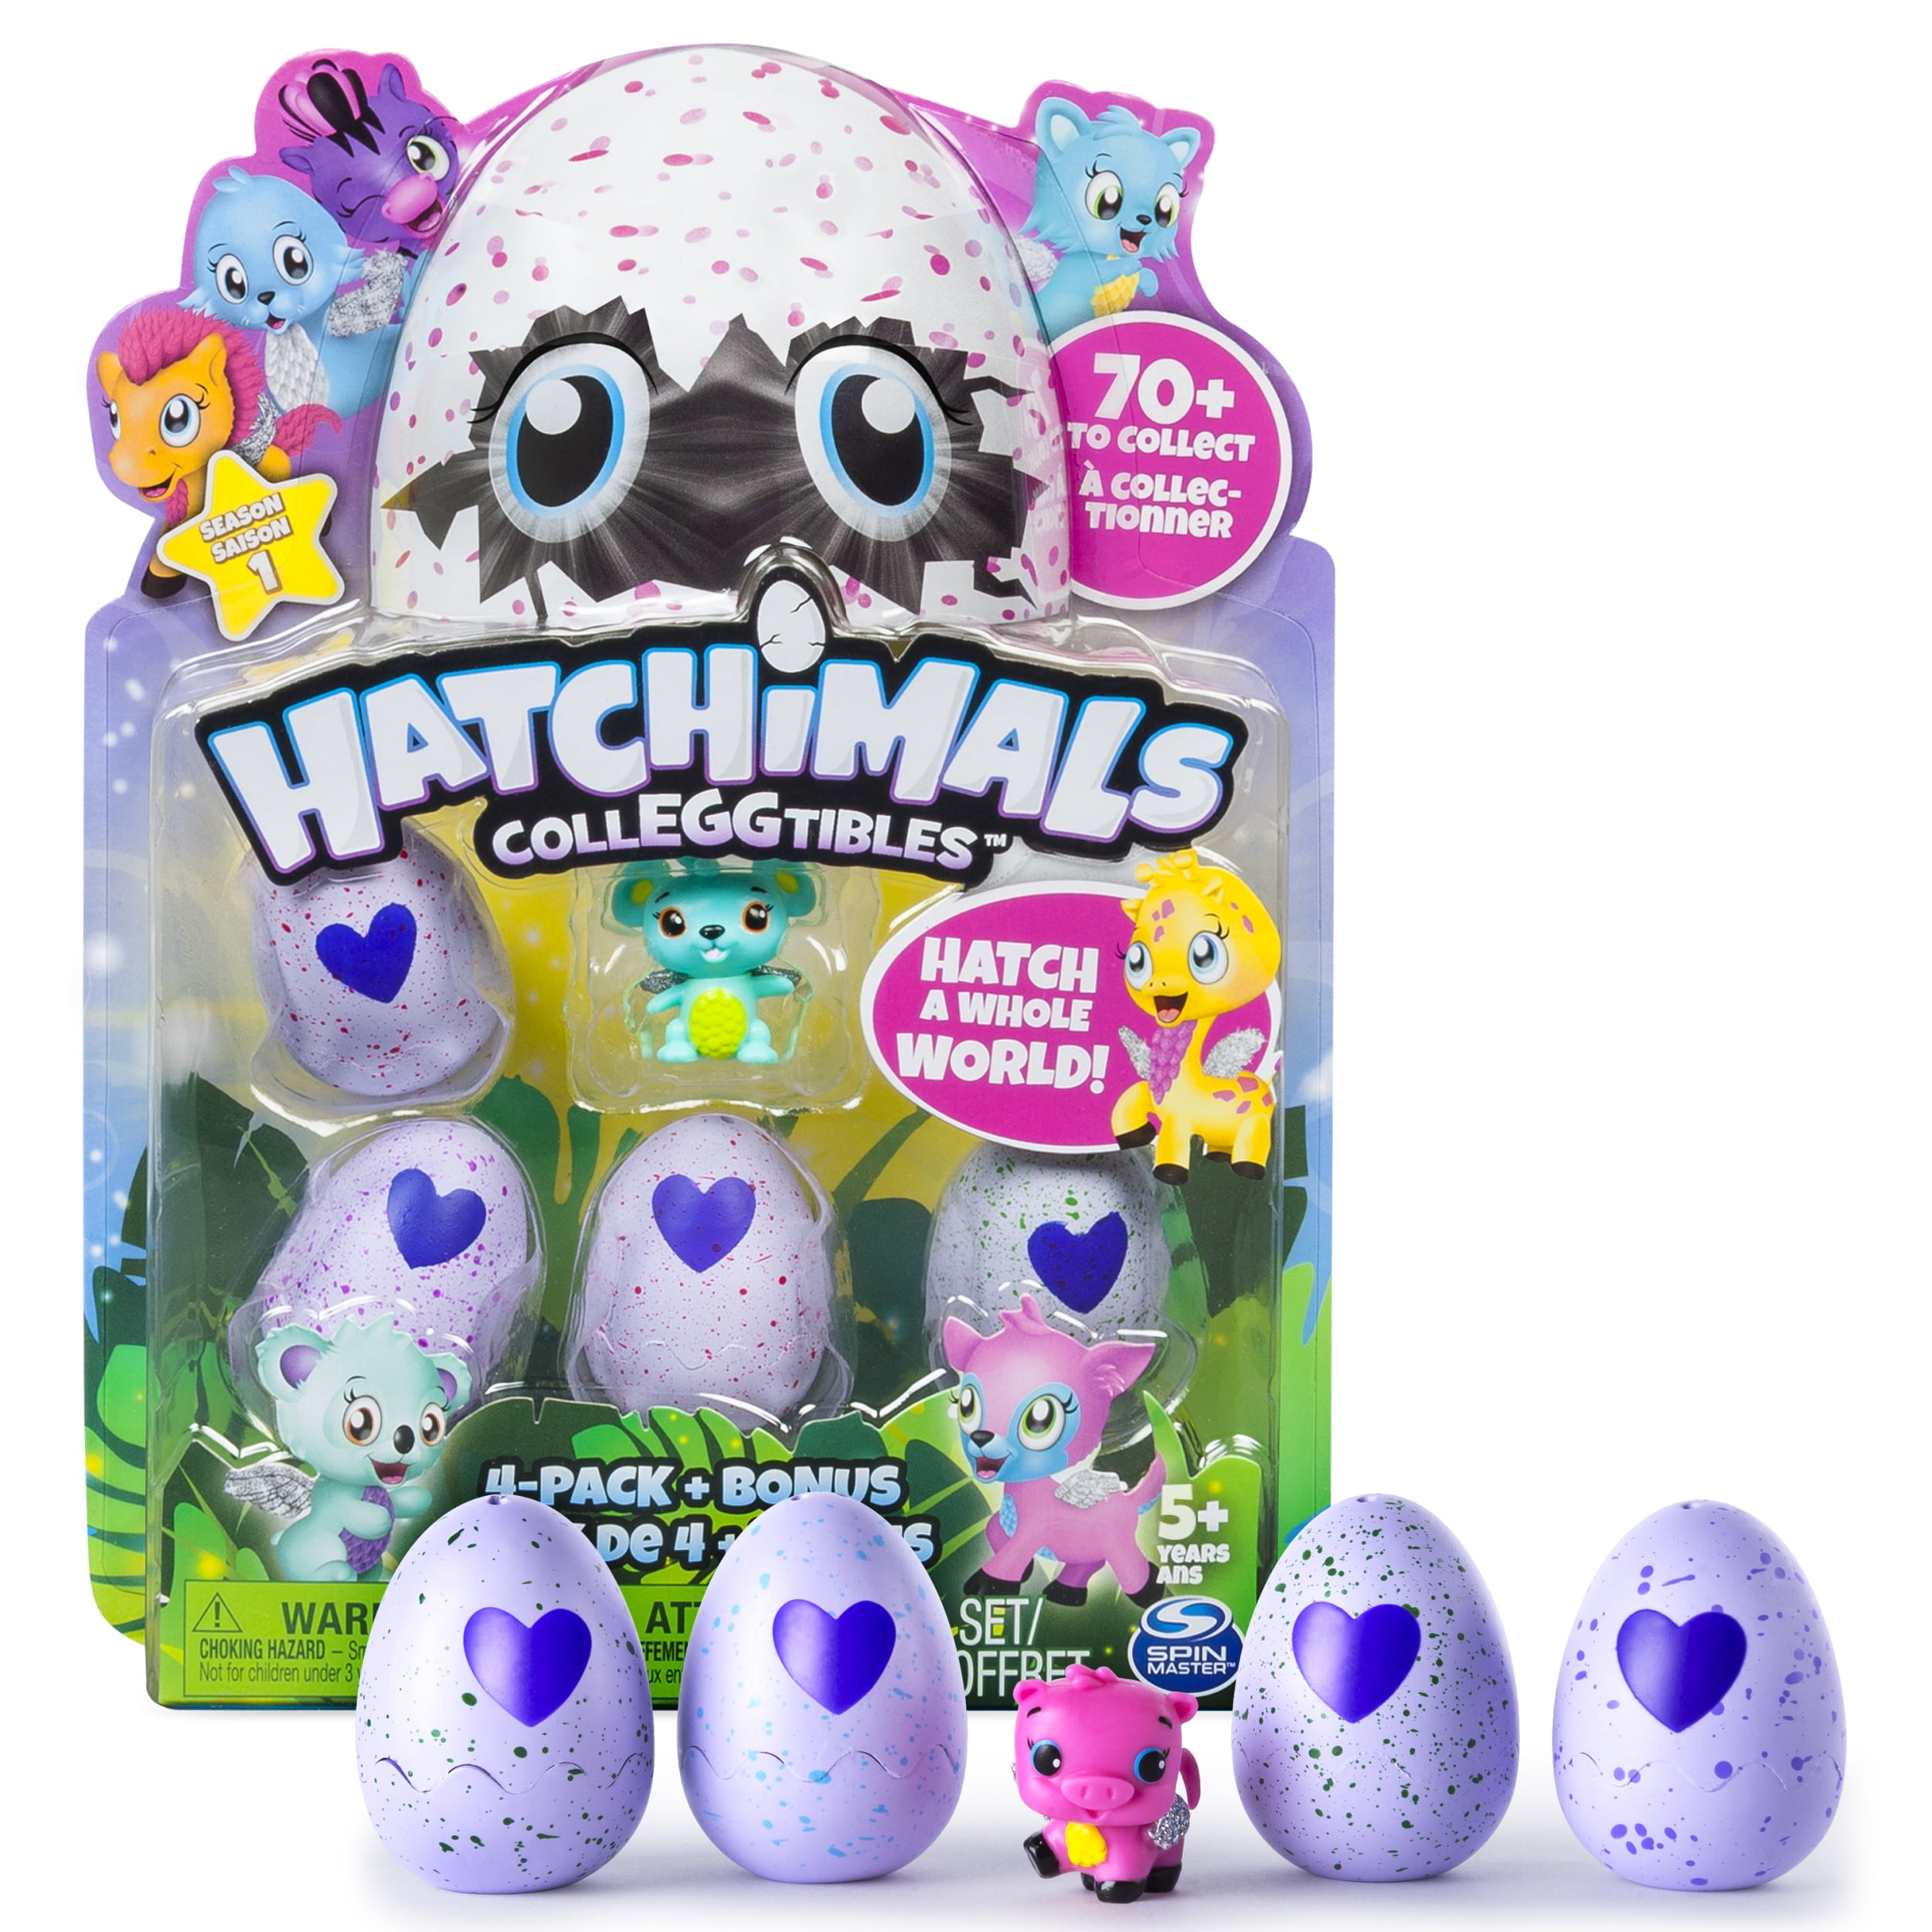 Hatchimals Colleggtibles 4-pack Bonus From Season 1 by Spin Master for sale online 